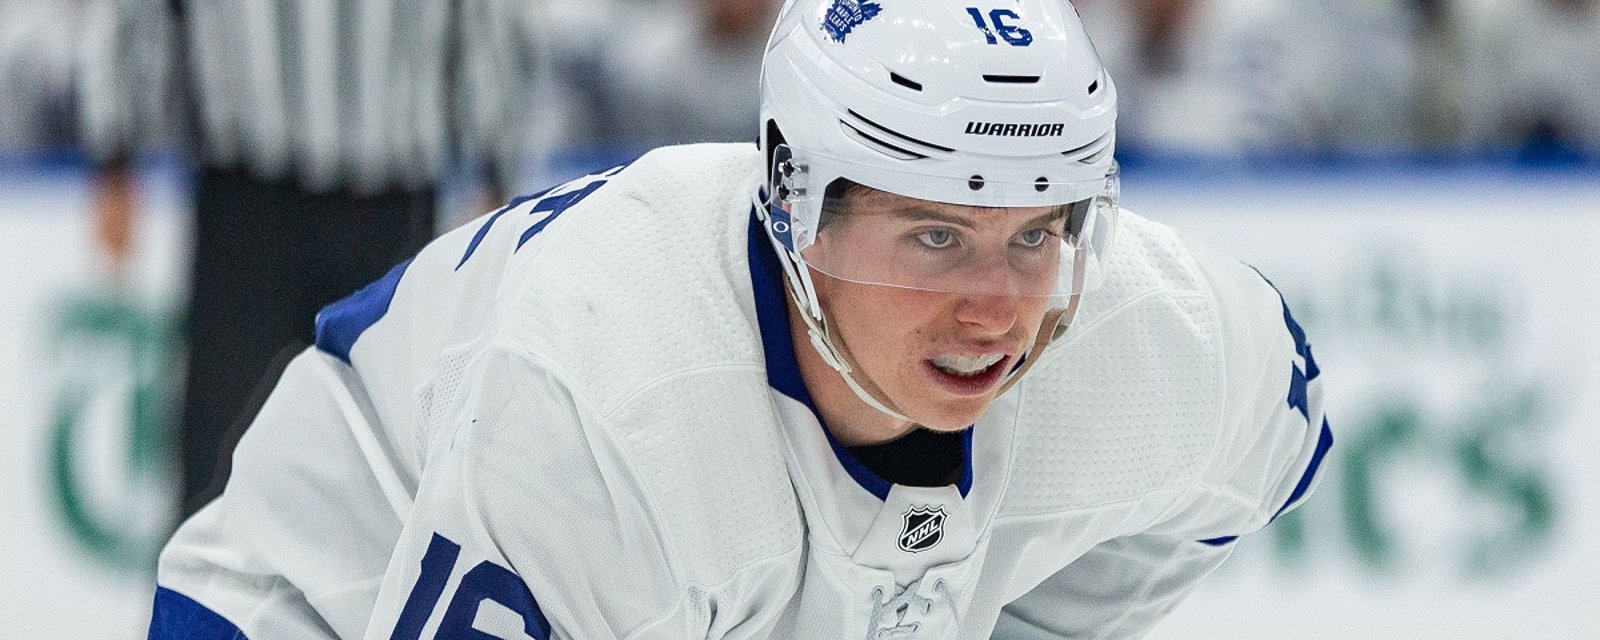 Mitch Marner comments on the hate he received during contract negotiations.